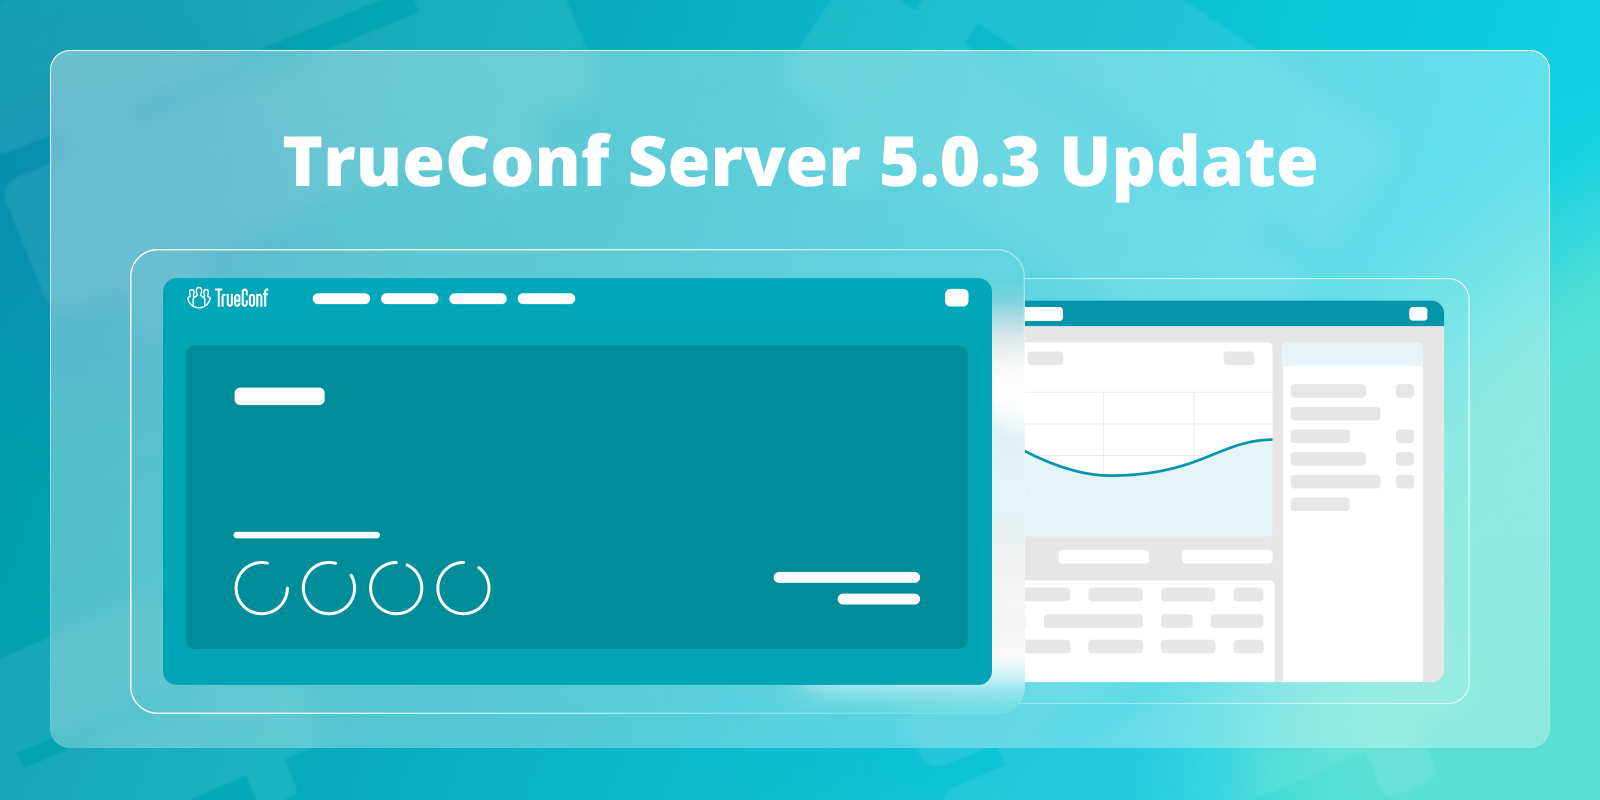 TrueConf Server 5.0.3 Update: Stability and Performance Improvements 7